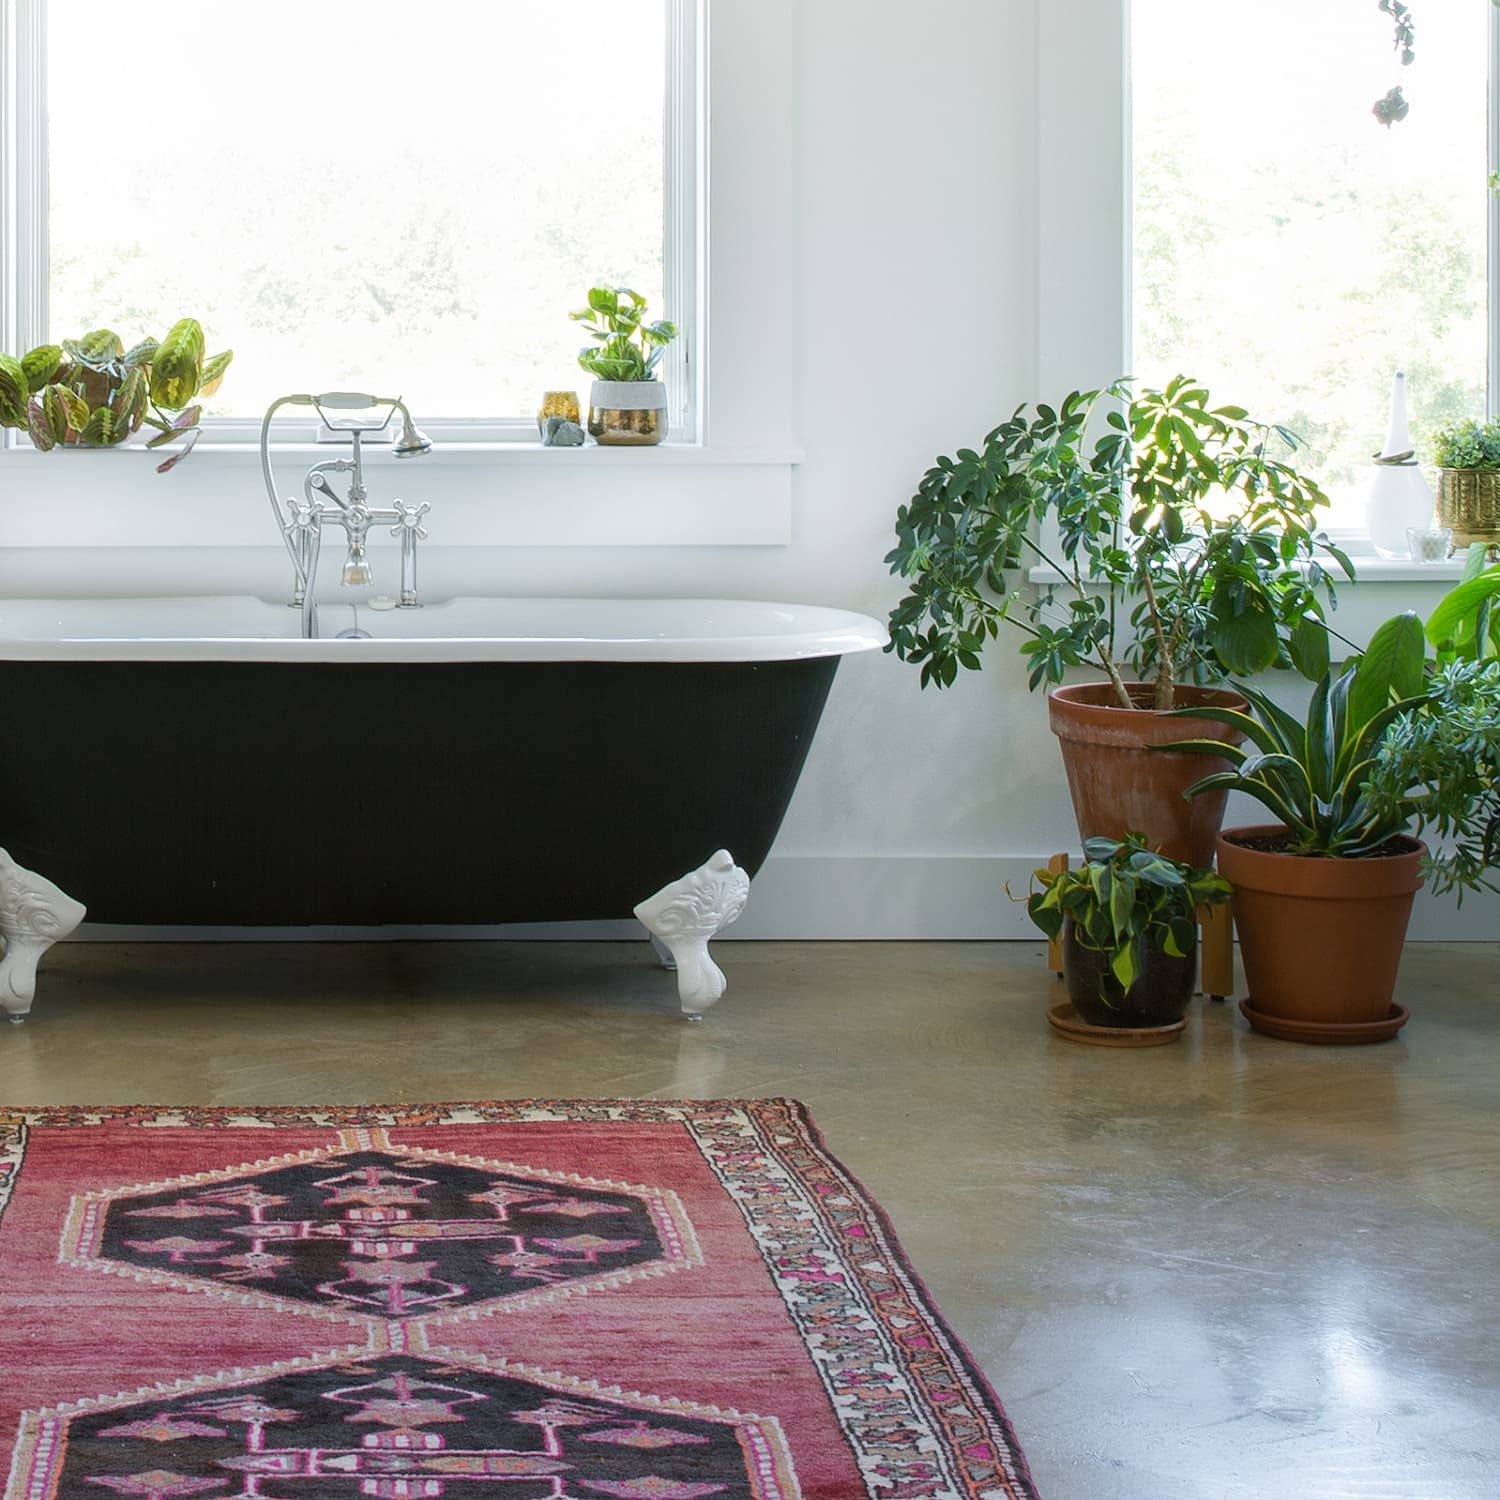 Wash the loneliness away with a long, hot bath